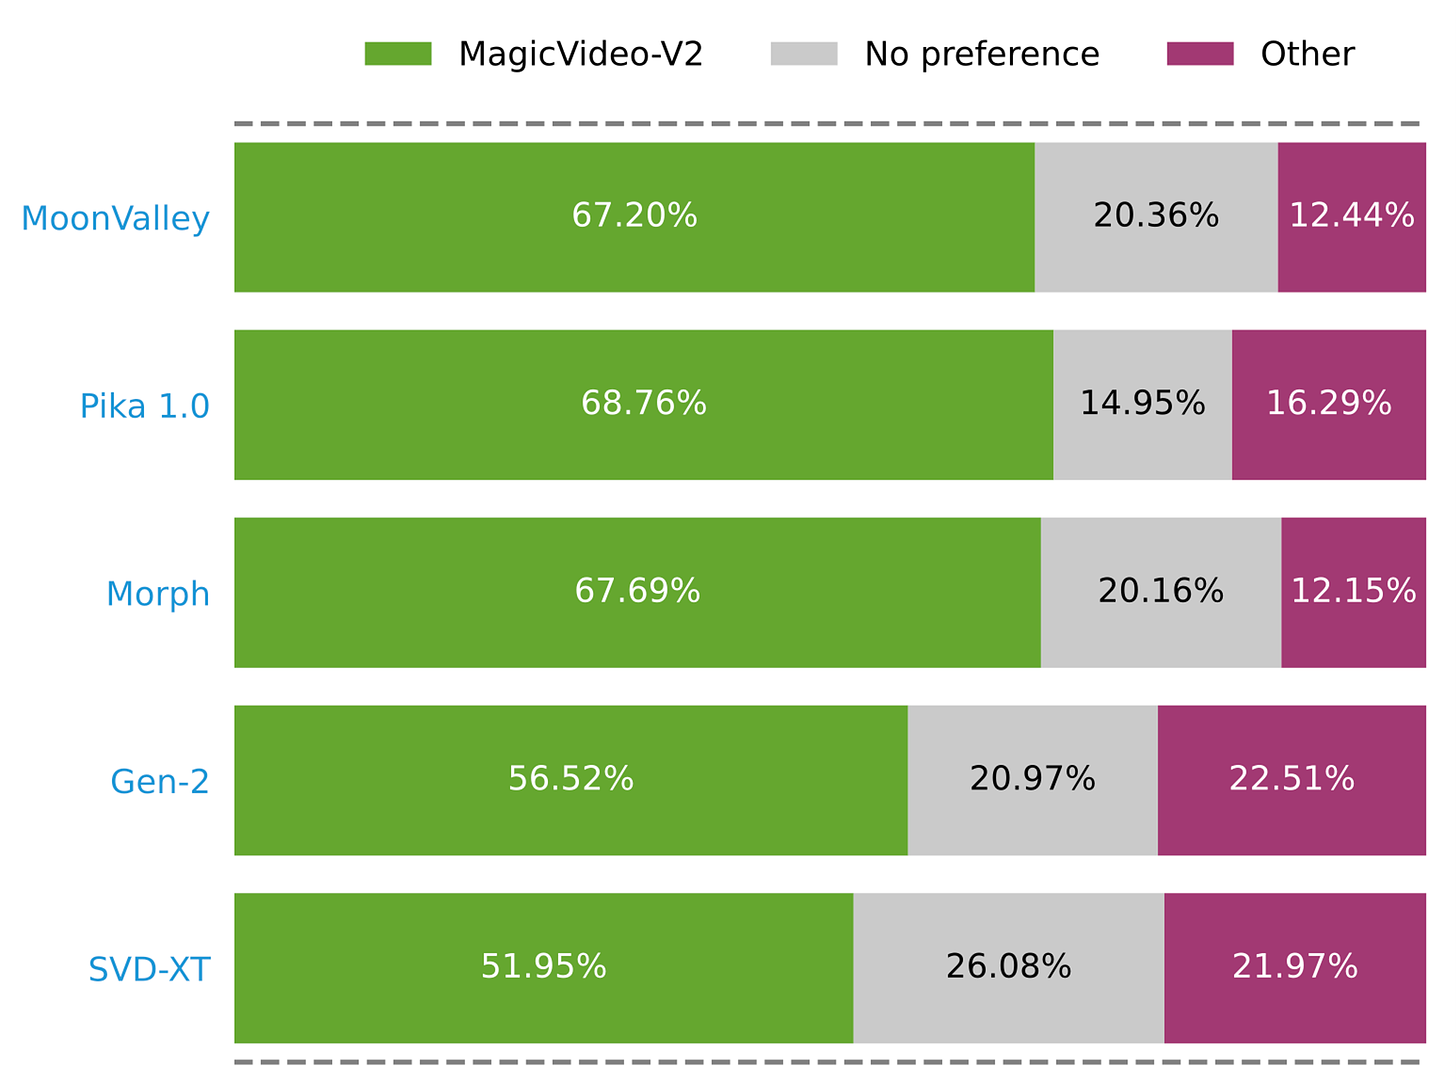 1-1 preferences of MagicVideo-V2 vs. other text-to-image models